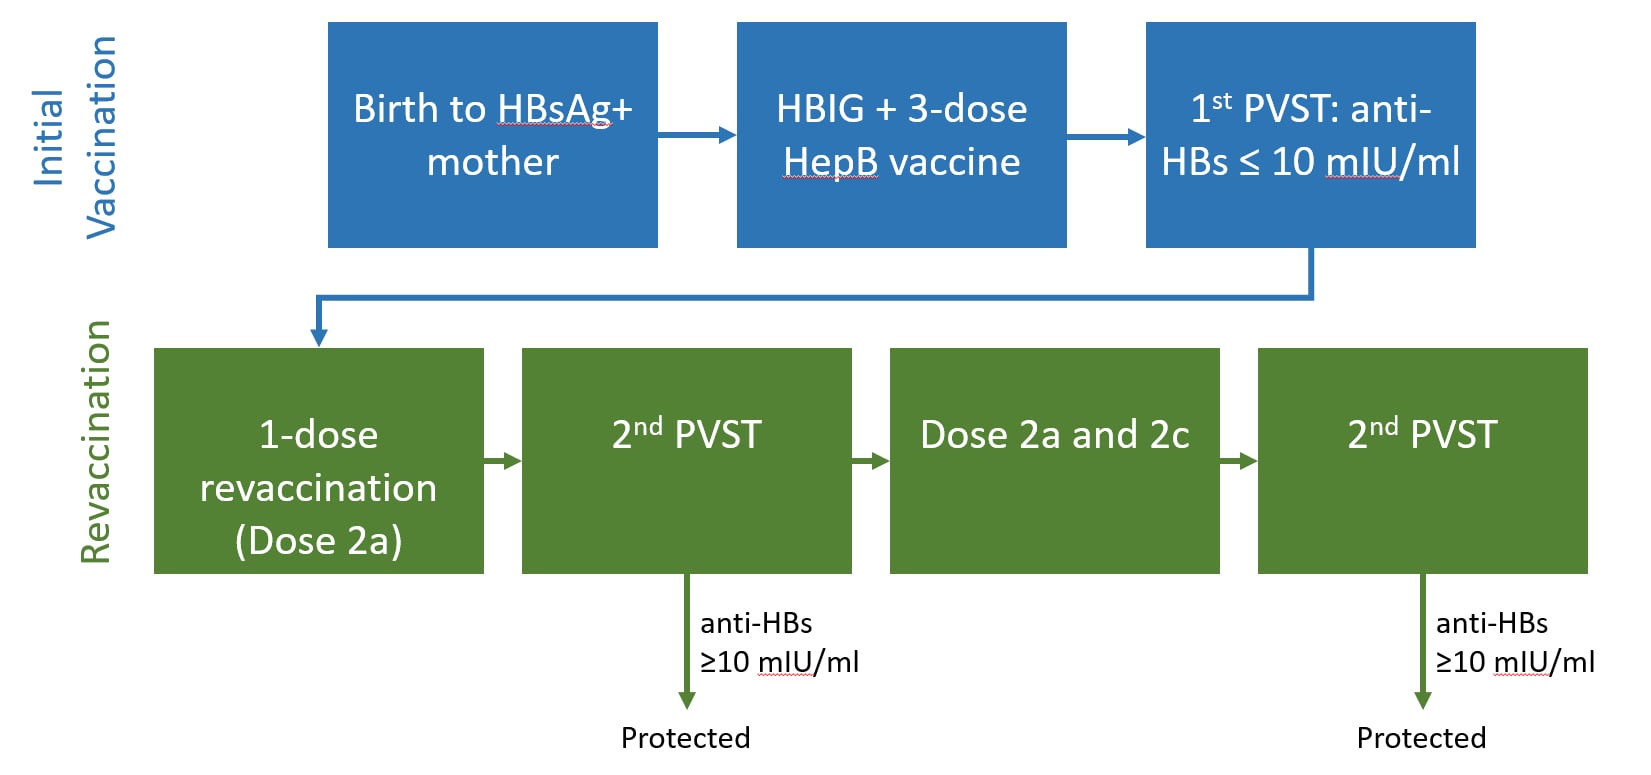 Cost analysis of single-dose hepatitis B revaccination among infants born to Hepatitis B surface antigen-positive mothers and not responding to the initial vaccine series